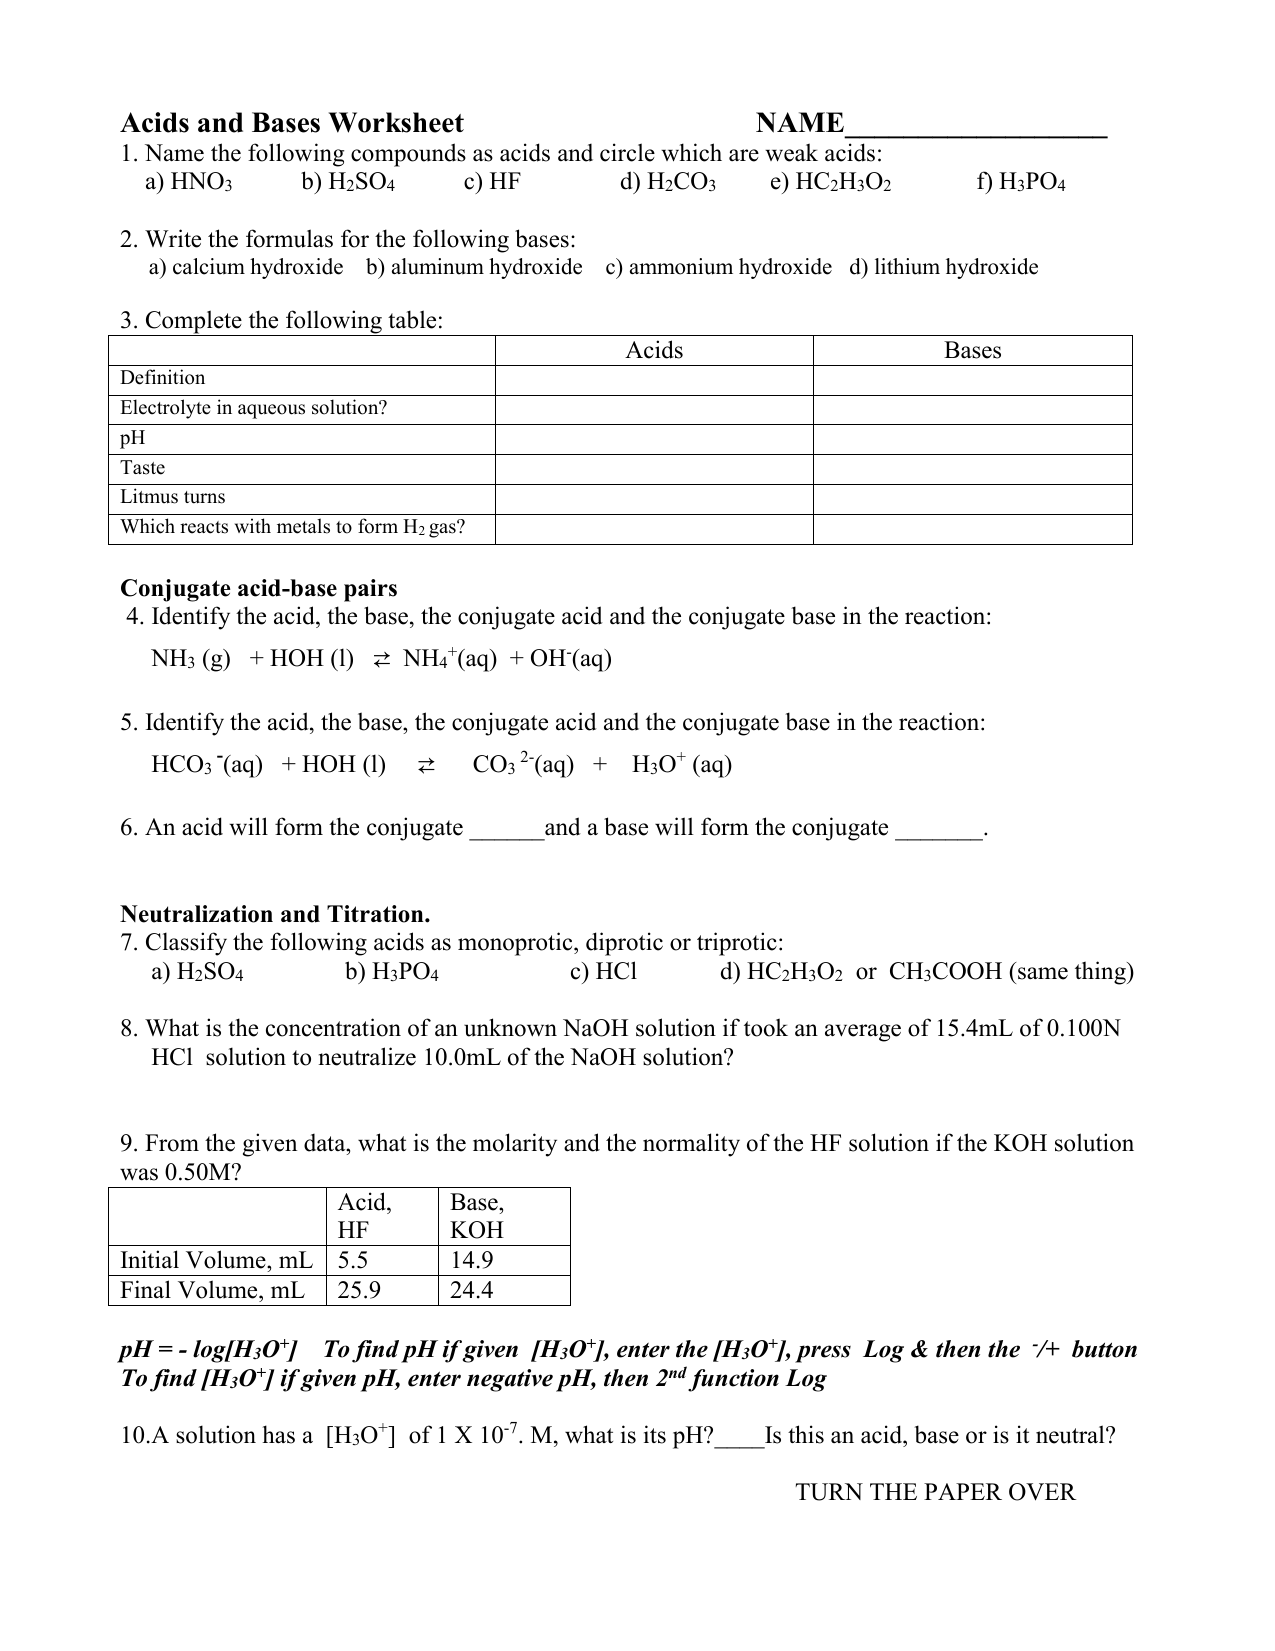 Acids and Bases Worksheet With Regard To Acid And Bases Worksheet Answers